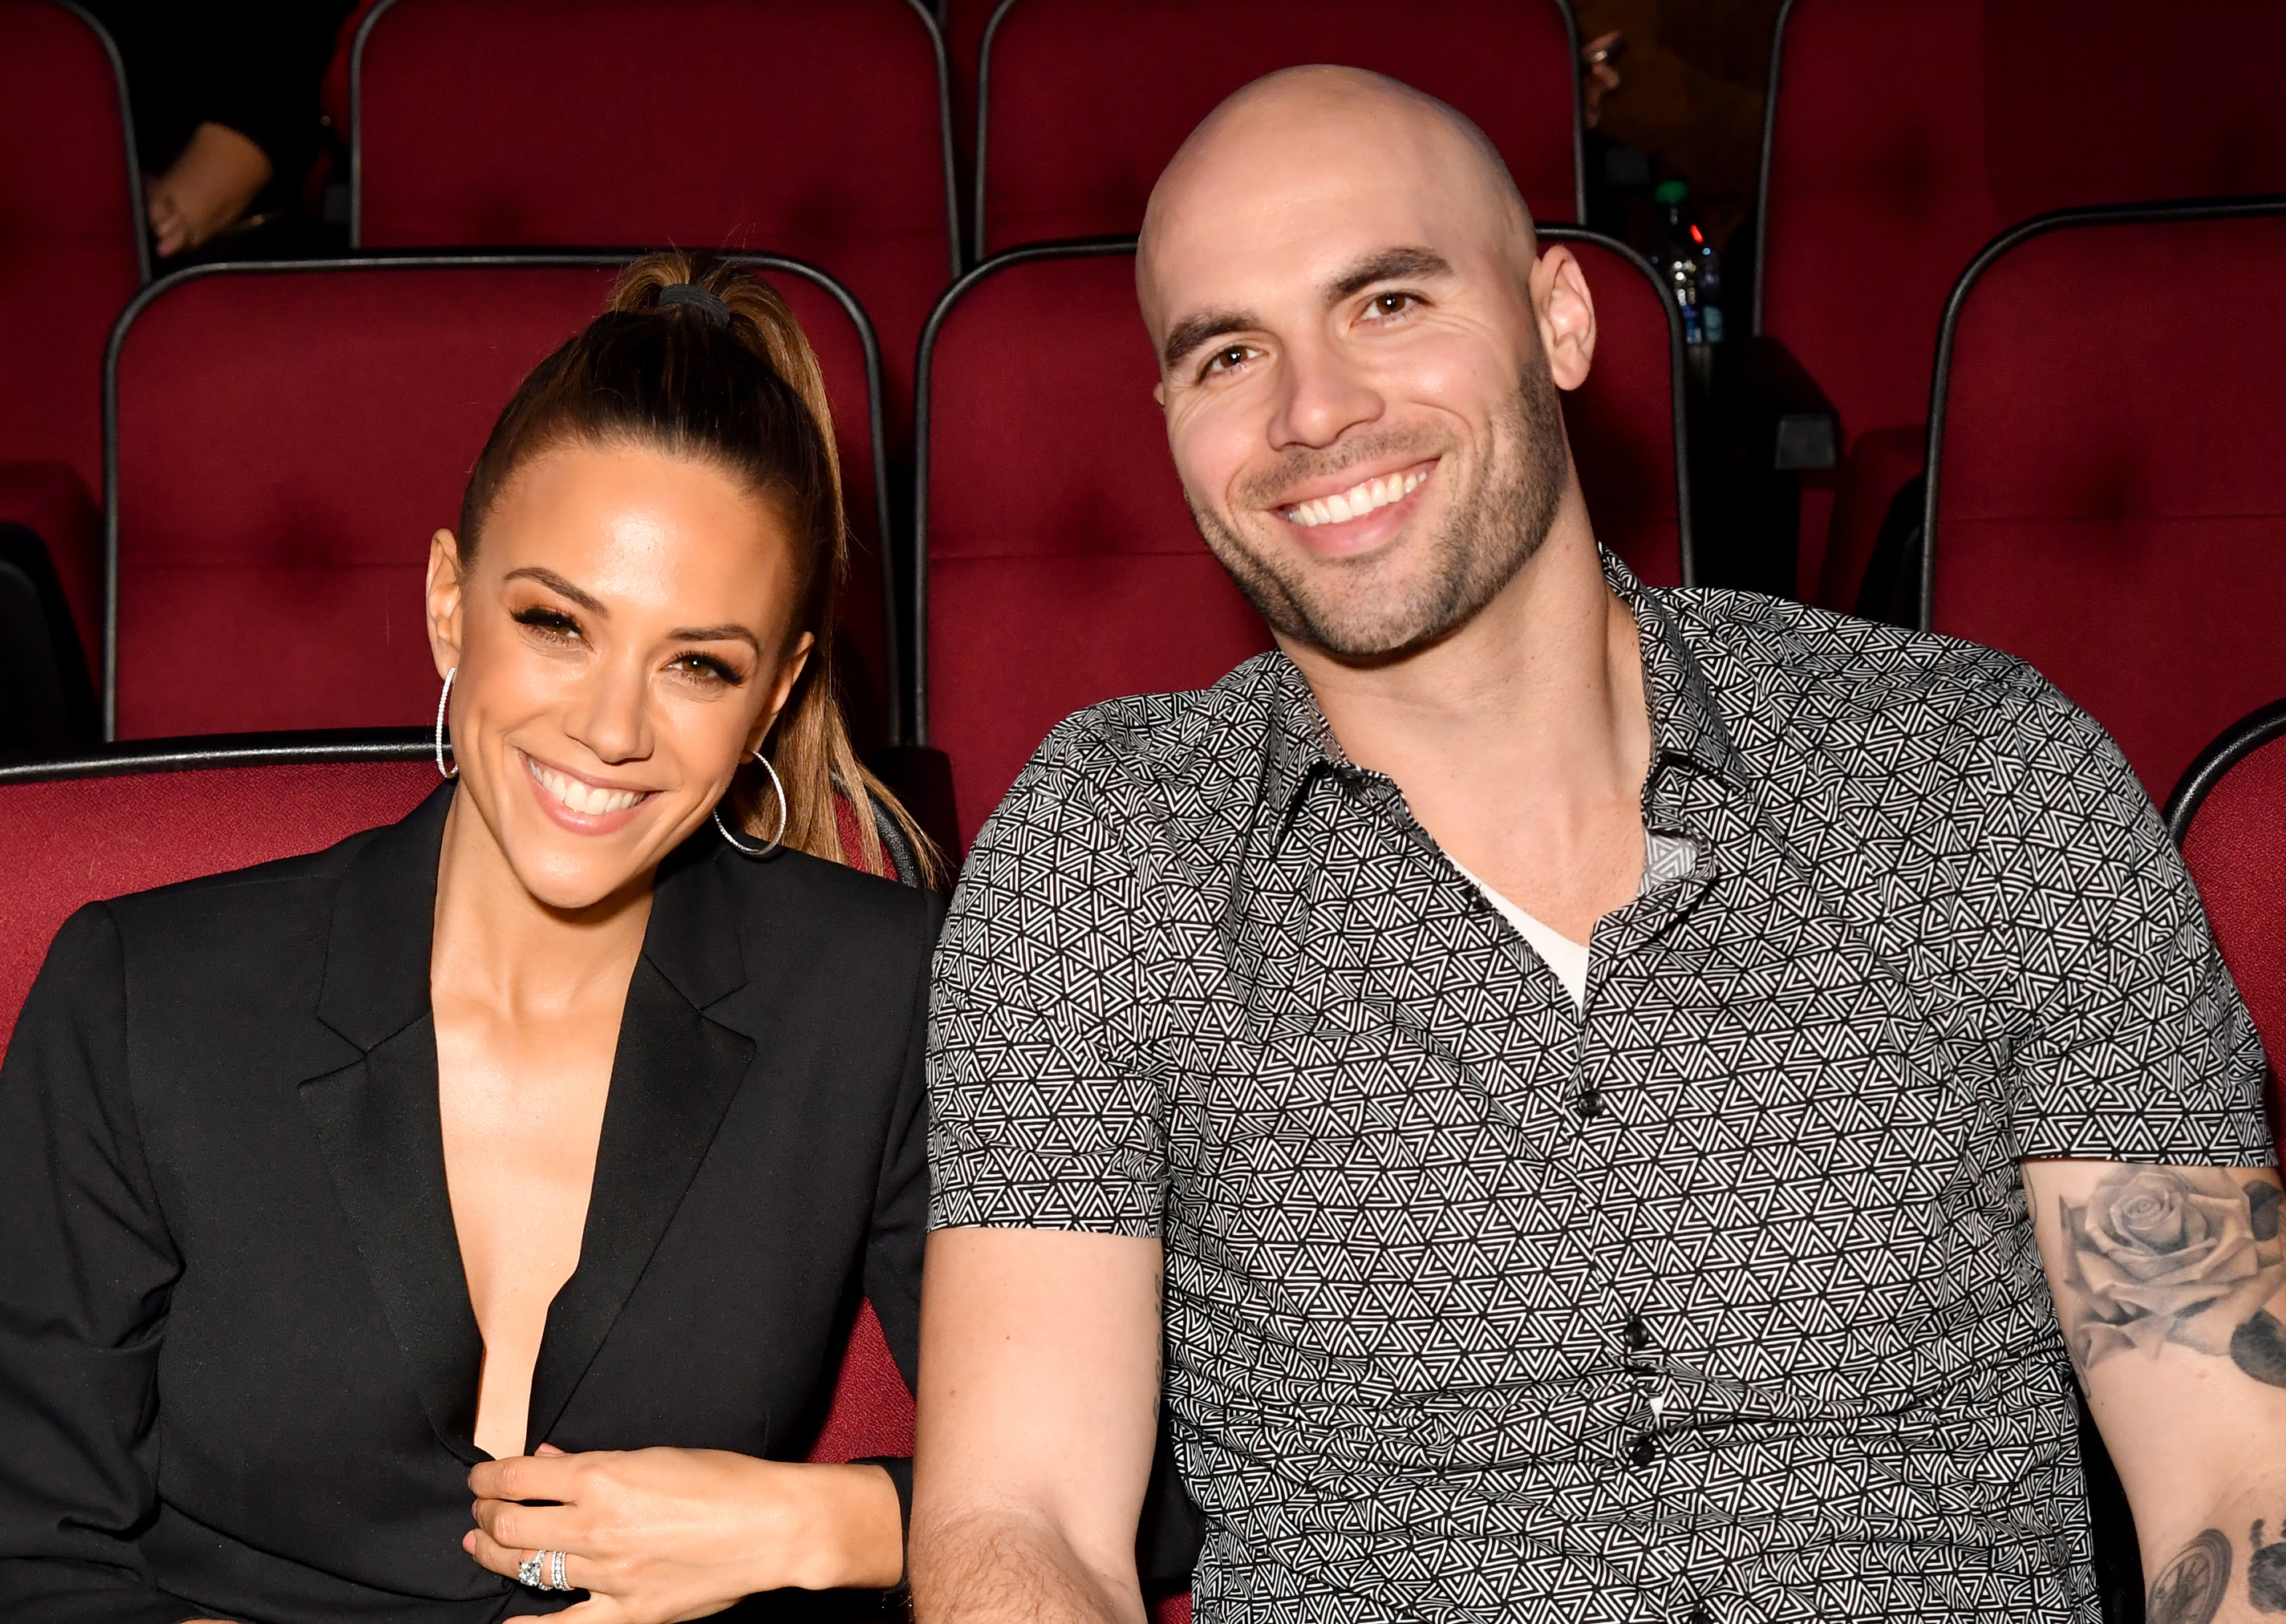 <p>Actress and country music singer Jana Kramer and former pro football player Mike Caussin married in 2015, but not long after she gave birth to their first child in 2016, they separated. Us Weekly reported that Jana learned Mike had <a href="https://www.wonderwall.com/celebrity/couples/demis-boyfriend-of-a-few-months-proposed-plus-more-celeb-love-news-367839.gallery?photoId=366338">cheated with multiple women</a>; he then entered treatment for sex addiction. <a href="https://www.wonderwall.com/news/has-jana-kramer-reconciled-sex-addict-estranged-husband-3006100.article">They reconciled</a> and welcomed their second child in 2018 -- the same year Mike suffered a "massive" relapse in his sex addiction, Jana shared a year later, though she said he hadn't stepped outside the marriage. For years, they spoke openly about <a href="https://www.wonderwall.com/news/jana-kramer-husband-spark-split-speculation-3021918.article">ongoing challenges with trust as well as other issues in their up-and-down relationship</a> on their "Whine Down" podcast and in 2020, <a href="https://www.wonderwall.com/celebrity/couples/tk-plus-more-celeb-love-news-381784.gallery?photoId=366338">they published the book</a> "The Good Fight: Wanting to Leave, Choosing to Stay, and the Powerful Practice for Loving Faithfully." But in April 2021, <a href="https://www.wonderwall.com/celebrity/couples/one-tree-hill-star-reportedly-caught-husband-cheating-again-plus-more-celeb-love-news-448311.gallery?photoId=366338">Jana filed for divorce</a> amid reports from outlets including People magazine and Us Weekly that claimed Mike had cheated again. "I've fought y'all. I've loved hard. I've forgiven. I've put the work in. I've given everything I have, and now I have nothing else to give," she wrote on Instagram.</p>